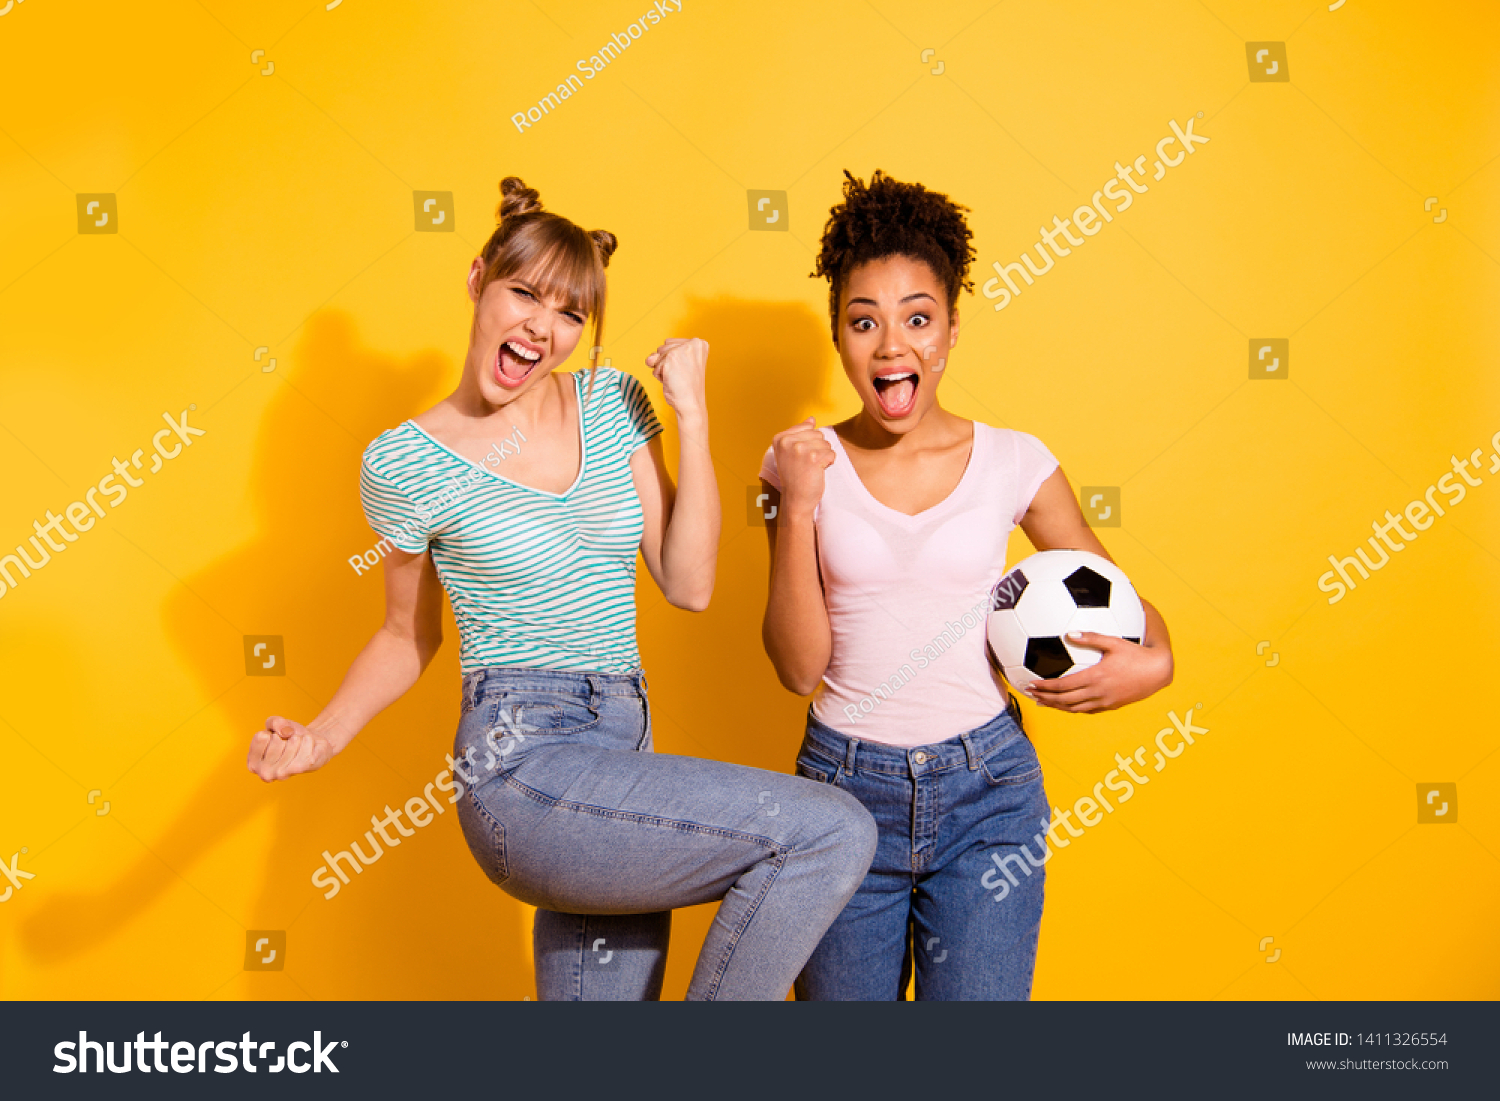 Portrait cheerful student hold hand energy achieve beautiful bun excited scream goal success sporty luck raise fists wavy curly jeans top-knot trendy style stylish t-shirt isolated yellow background #1411326554